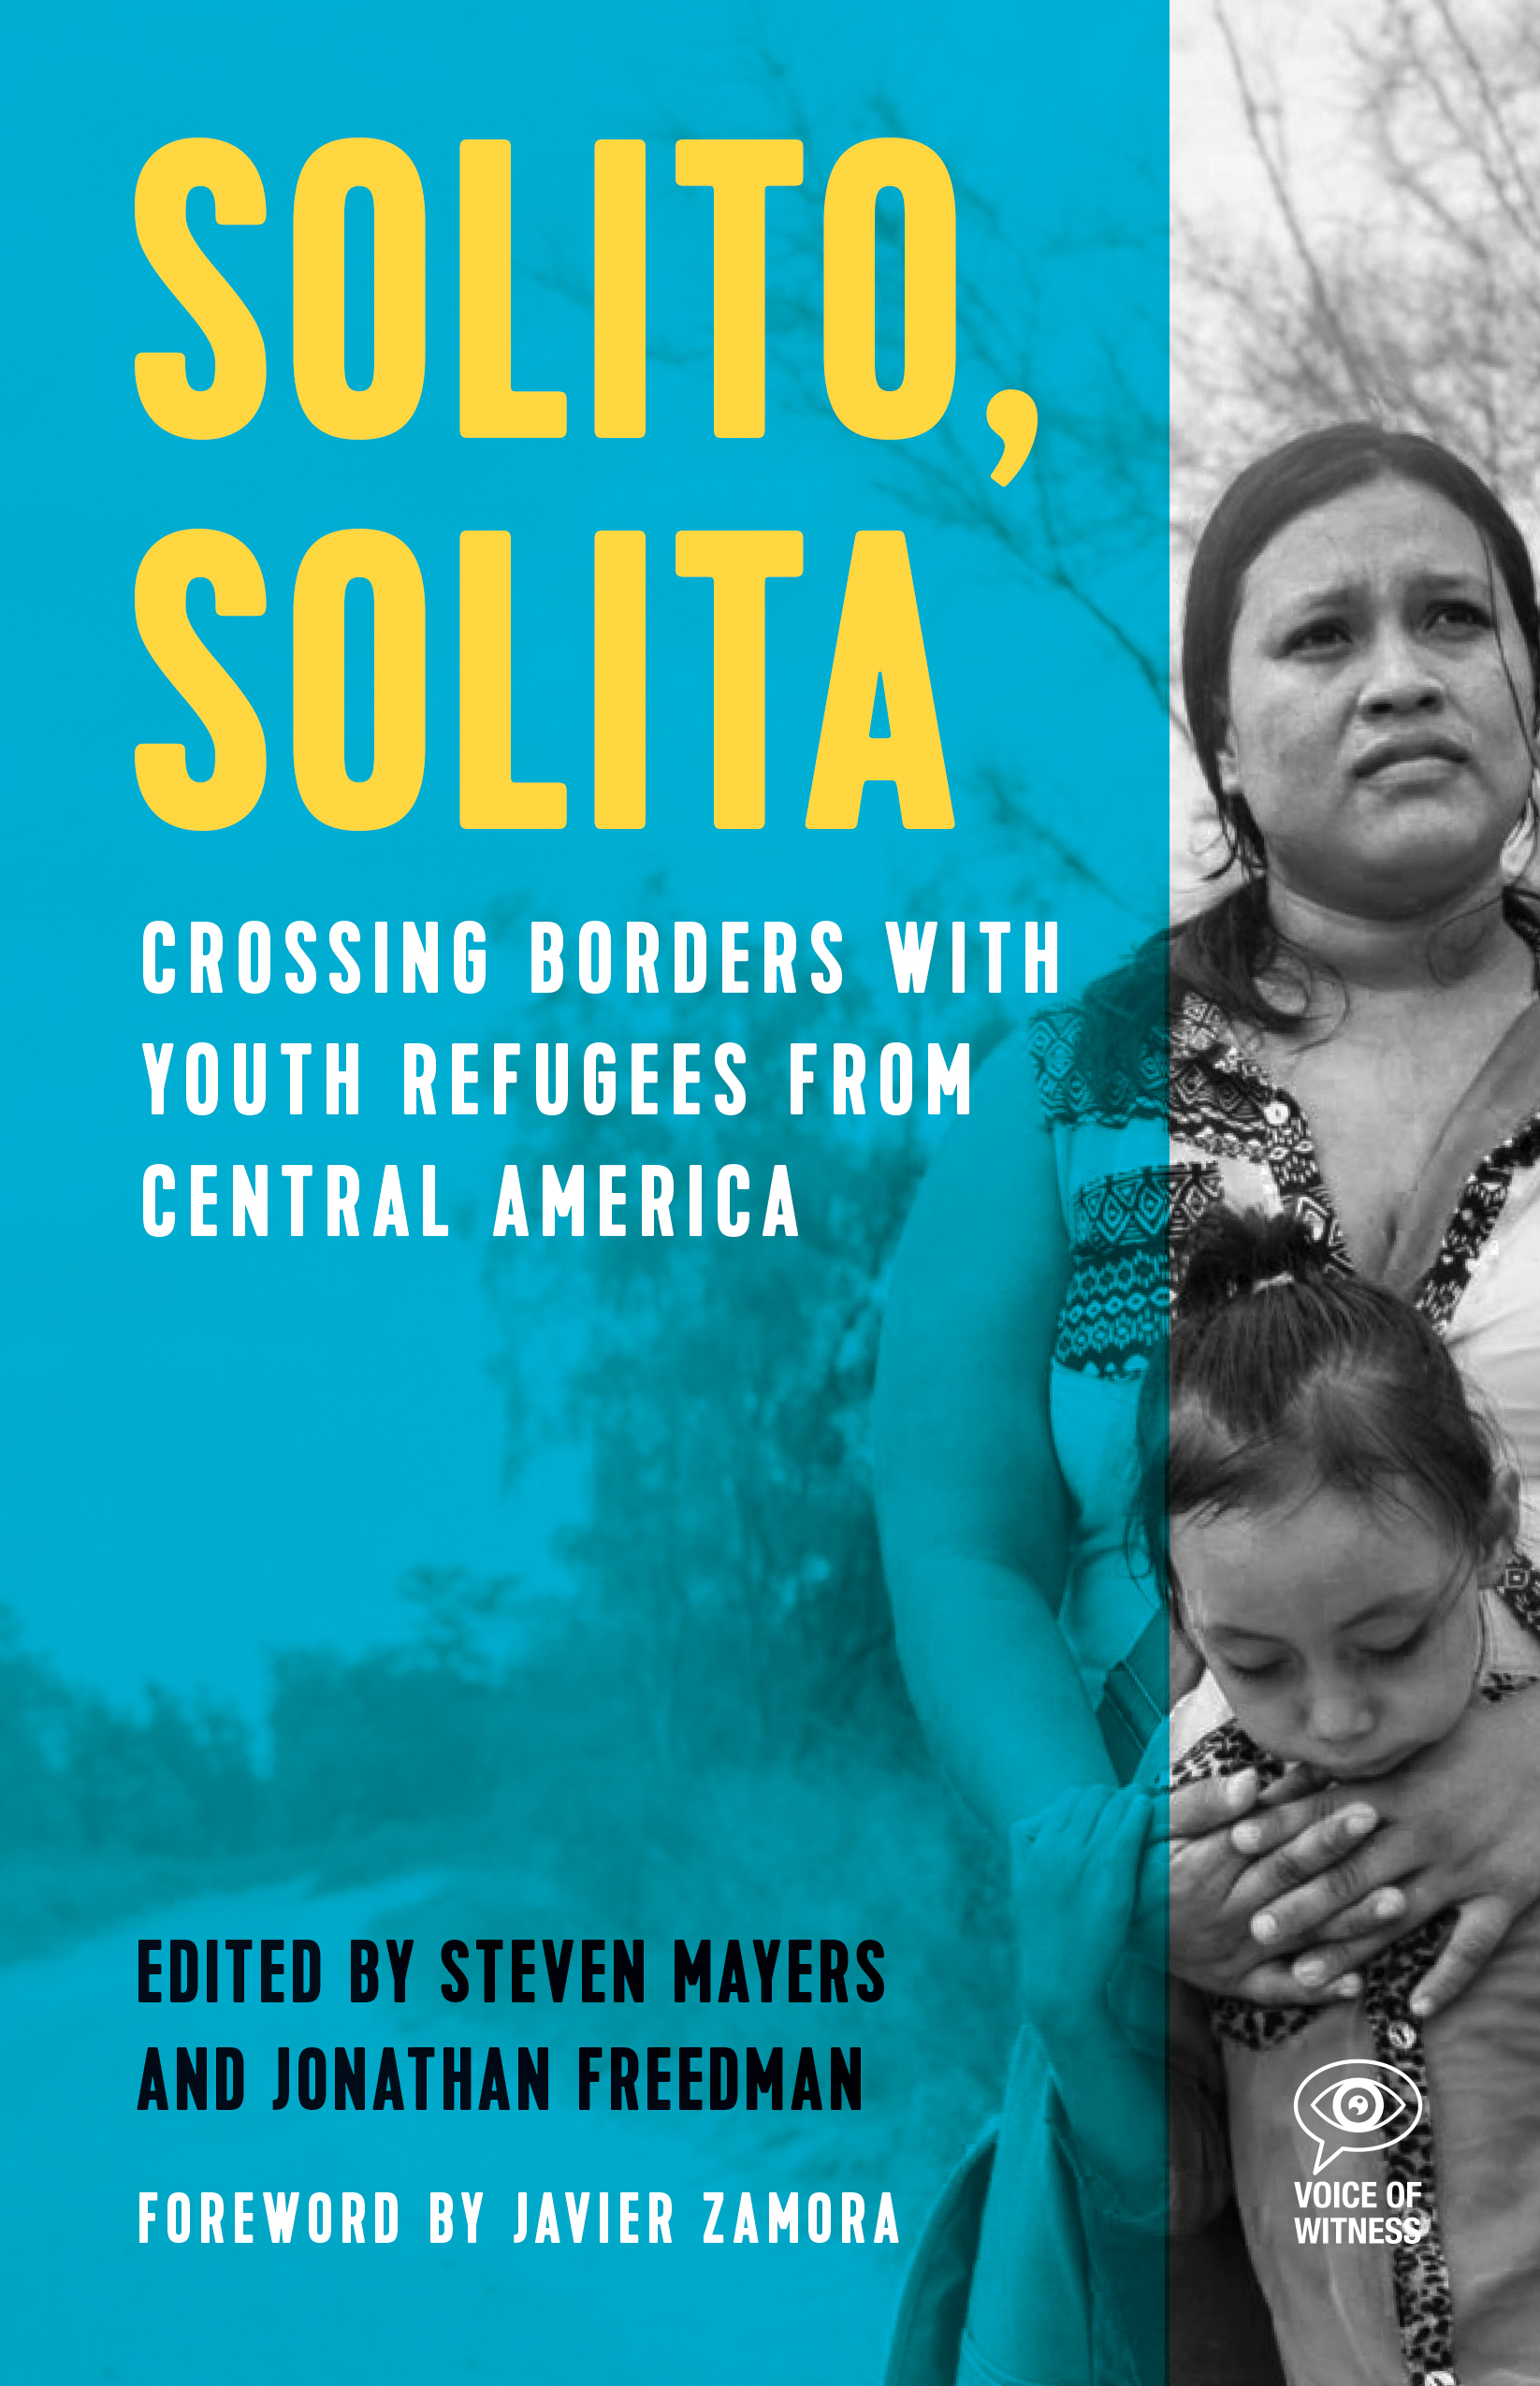 Solito, Solita: Crossing Borders with Youth Refugees From Central America Curriculum